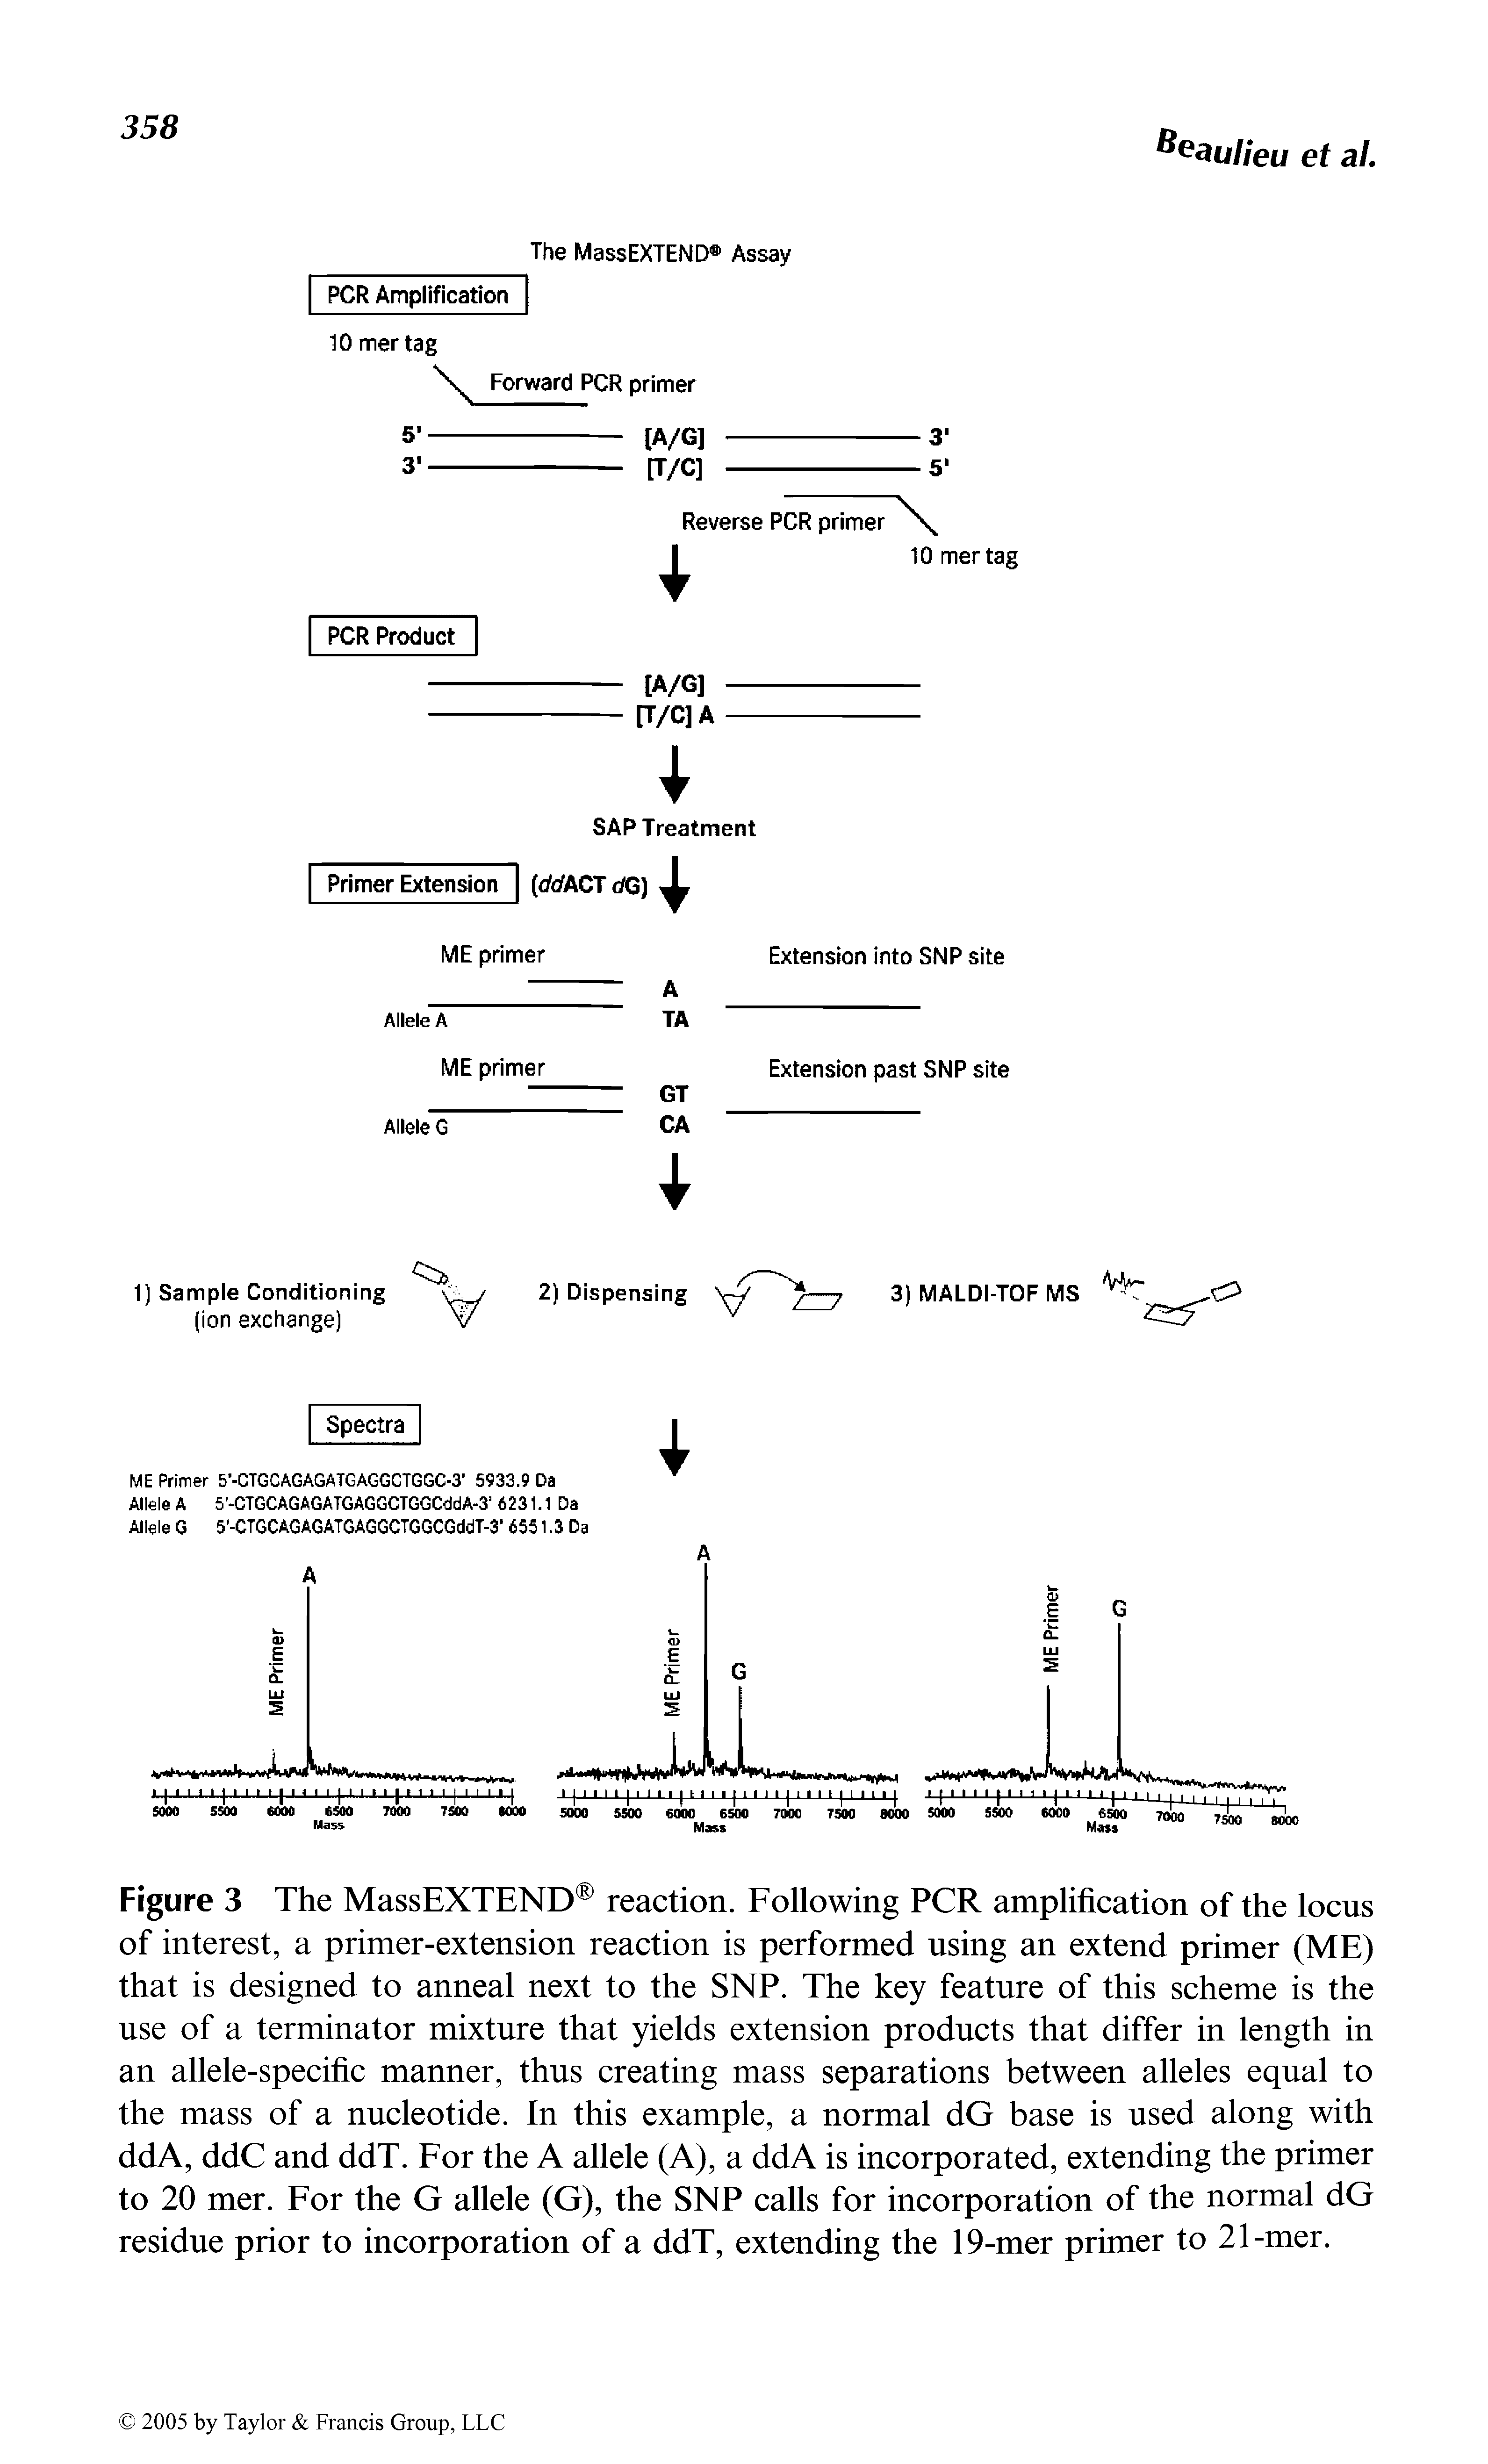 Figure 3 The MassEXTEND reaction. Following PCR amplification of the locus of interest, a primer-extension reaction is performed using an extend primer (ME) that is designed to anneal next to the SNP. The key feature of this scheme is the use of a terminator mixture that yields extension products that differ in length in an allele-specific manner, thus creating mass separations between alleles equal to the mass of a nucleotide. In this example, a normal dG base is used along with ddA, ddC and ddT. For the A allele (A), a ddA is incorporated, extending the primer to 20 mer. For the G allele (G), the SNP calls for incorporation of the normal dG residue prior to incorporation of a ddT, extending the 19-mer primer to 21-mer.